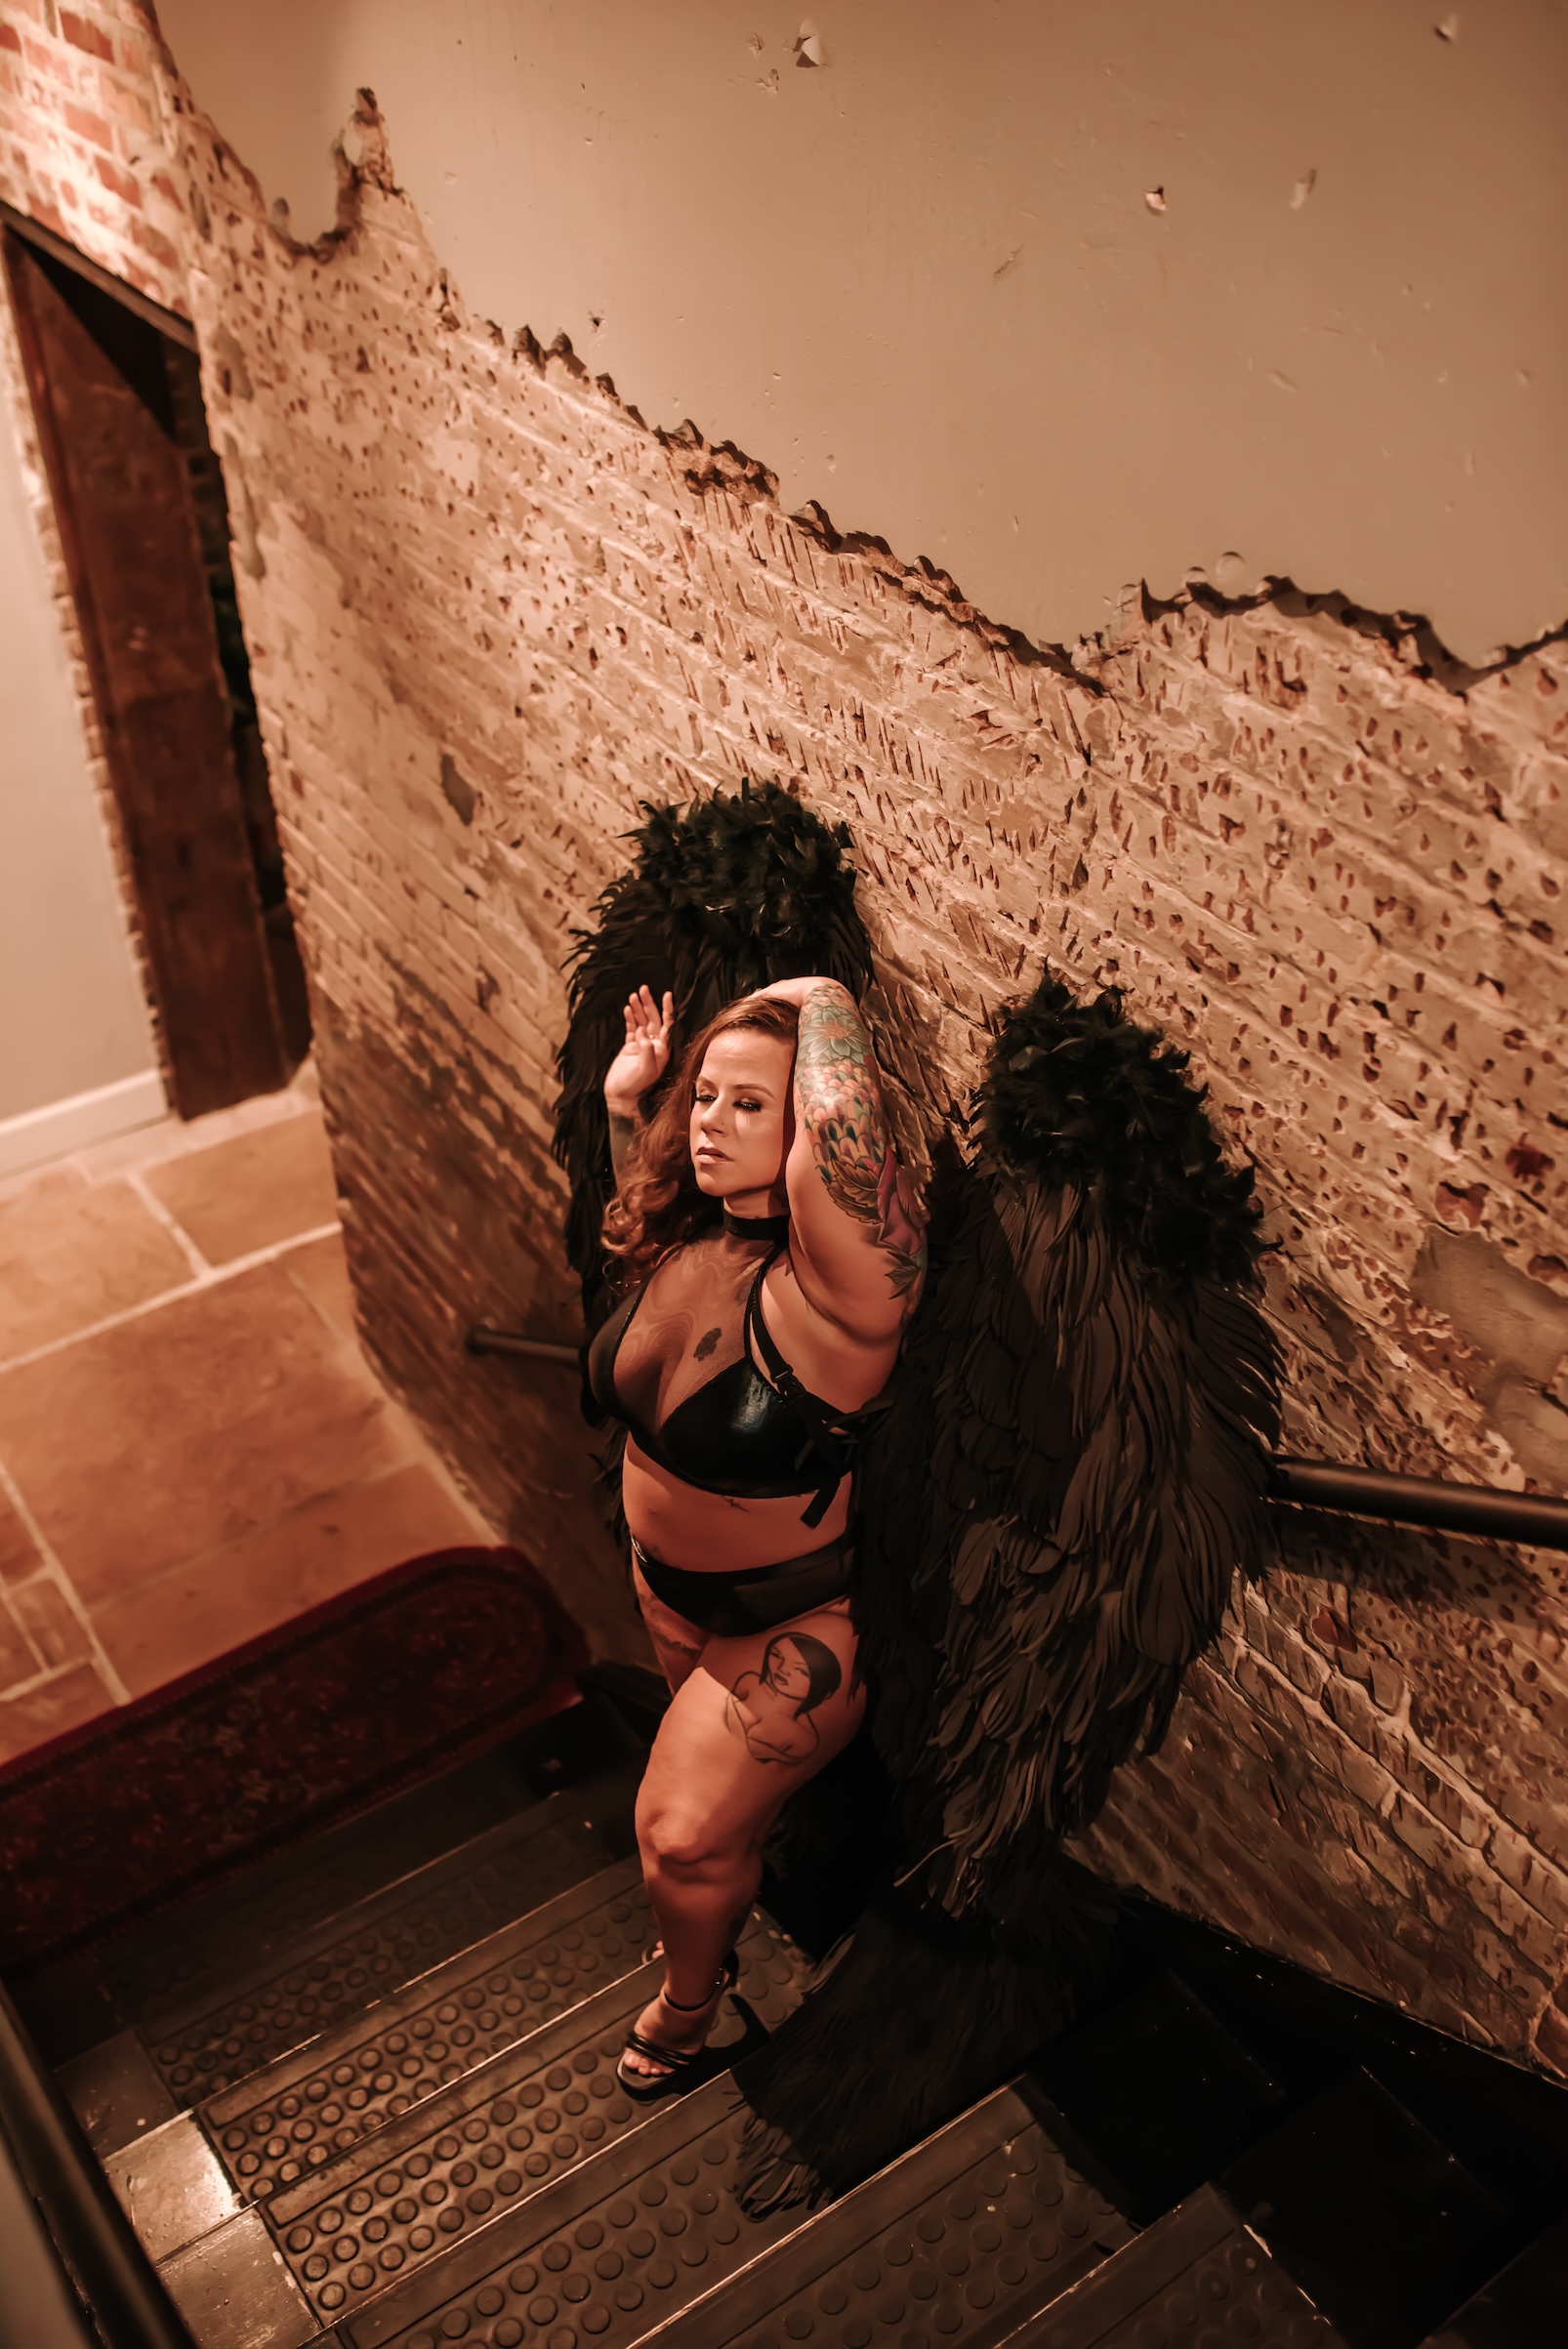 woman standing on staircase wearing black lingerie and black angel wings